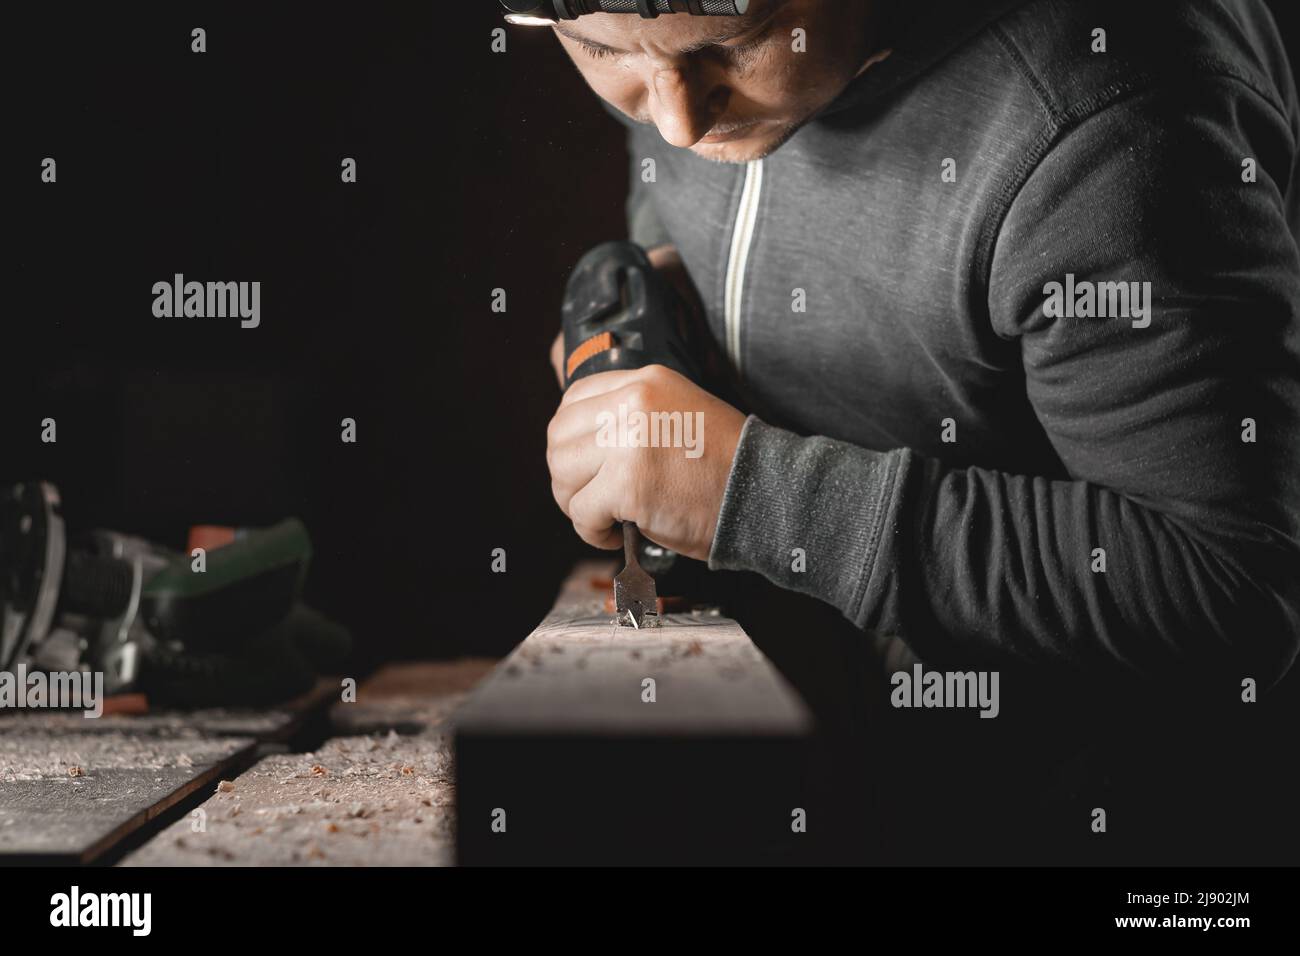 A man works with a drill in his workshop. Carpenter drills with a hand power tool in a dark room with directional light Stock Photo